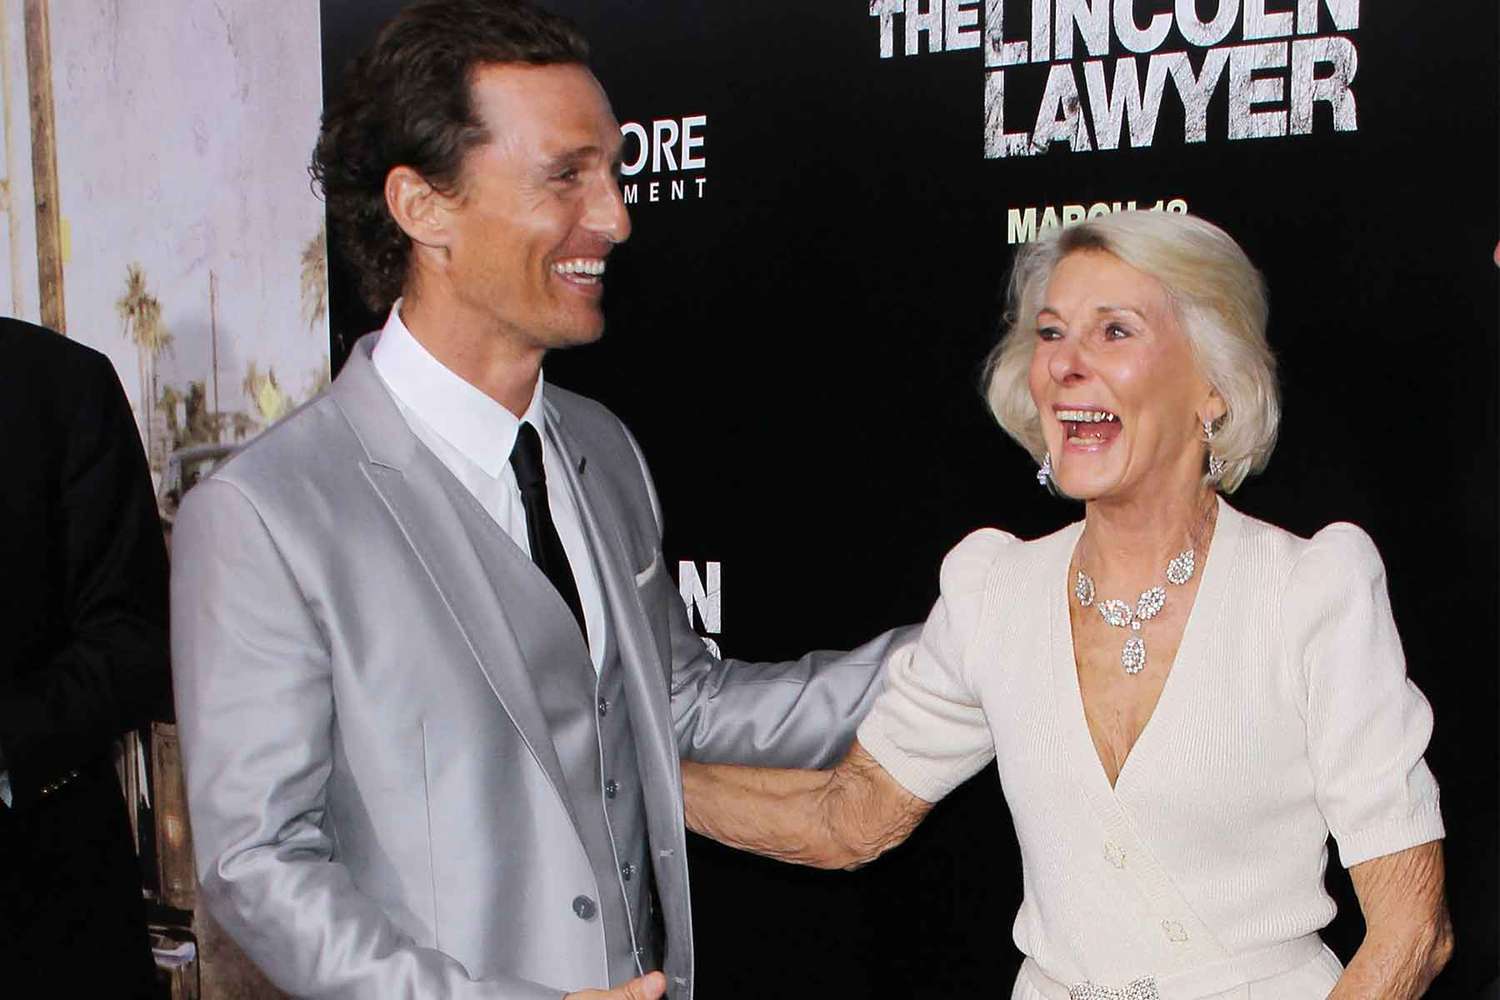 Matthew McConaughey’s Mom Would Send Him Back To Bed When His Attitude “Wasn’t Great” At Breakfast